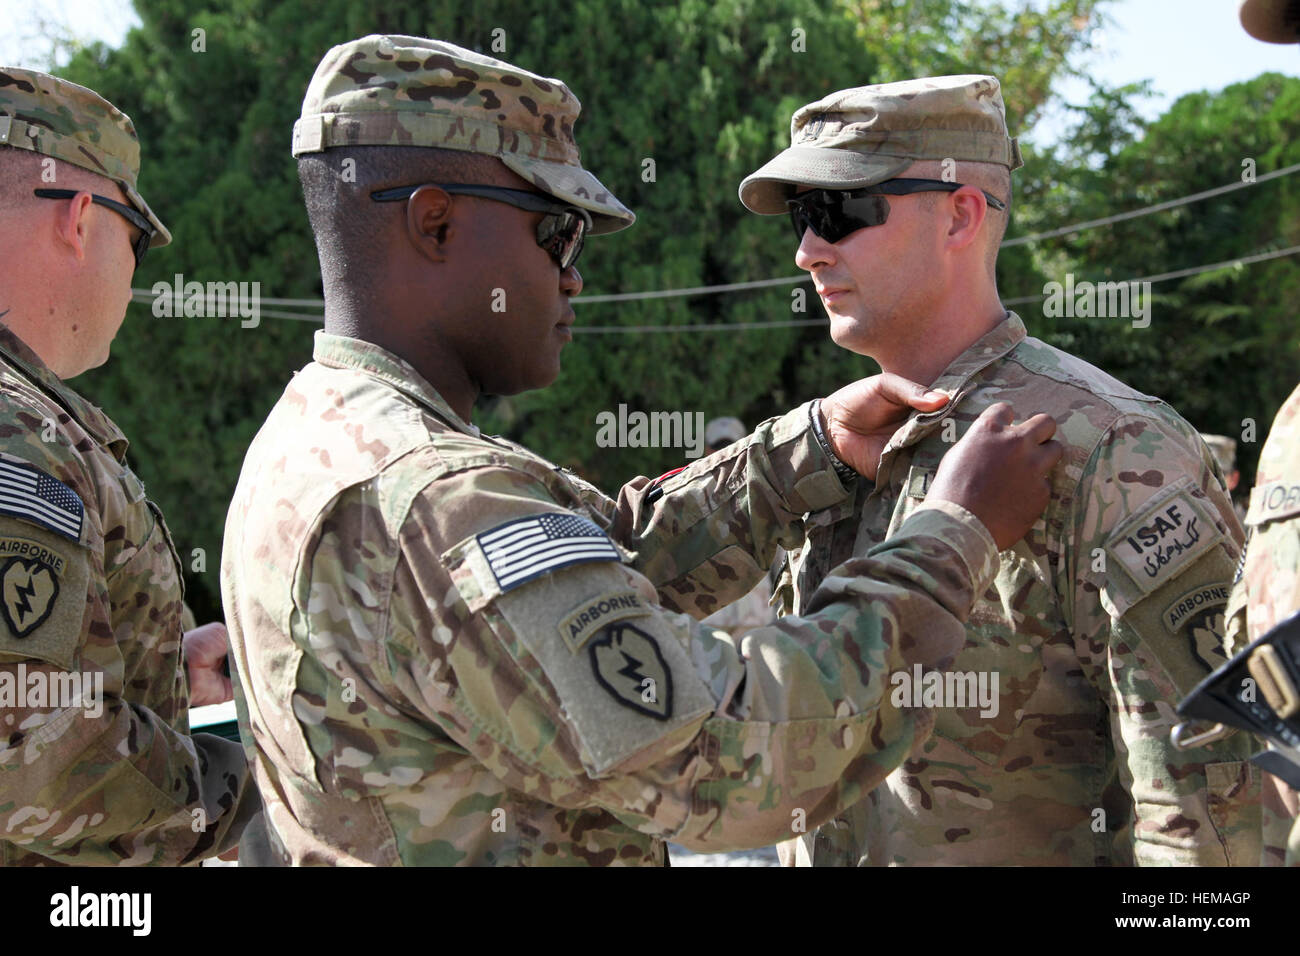 U.S. Army Capt. Dawhower with 425th Brigade Special Troops Battalion (Airborne), Task Force 4-25, is awarded the Combat Action Badge by U.S. Army Lt. Col. Frank Smith, battalion commander for 425th Brigade Special Troops Battalion (Airborne), on Forward Operating Base Salerno, Khost province, Afghanistan, Sept. 29, 2012. Award ceremony 120929-A-PO167-004 Stock Photo